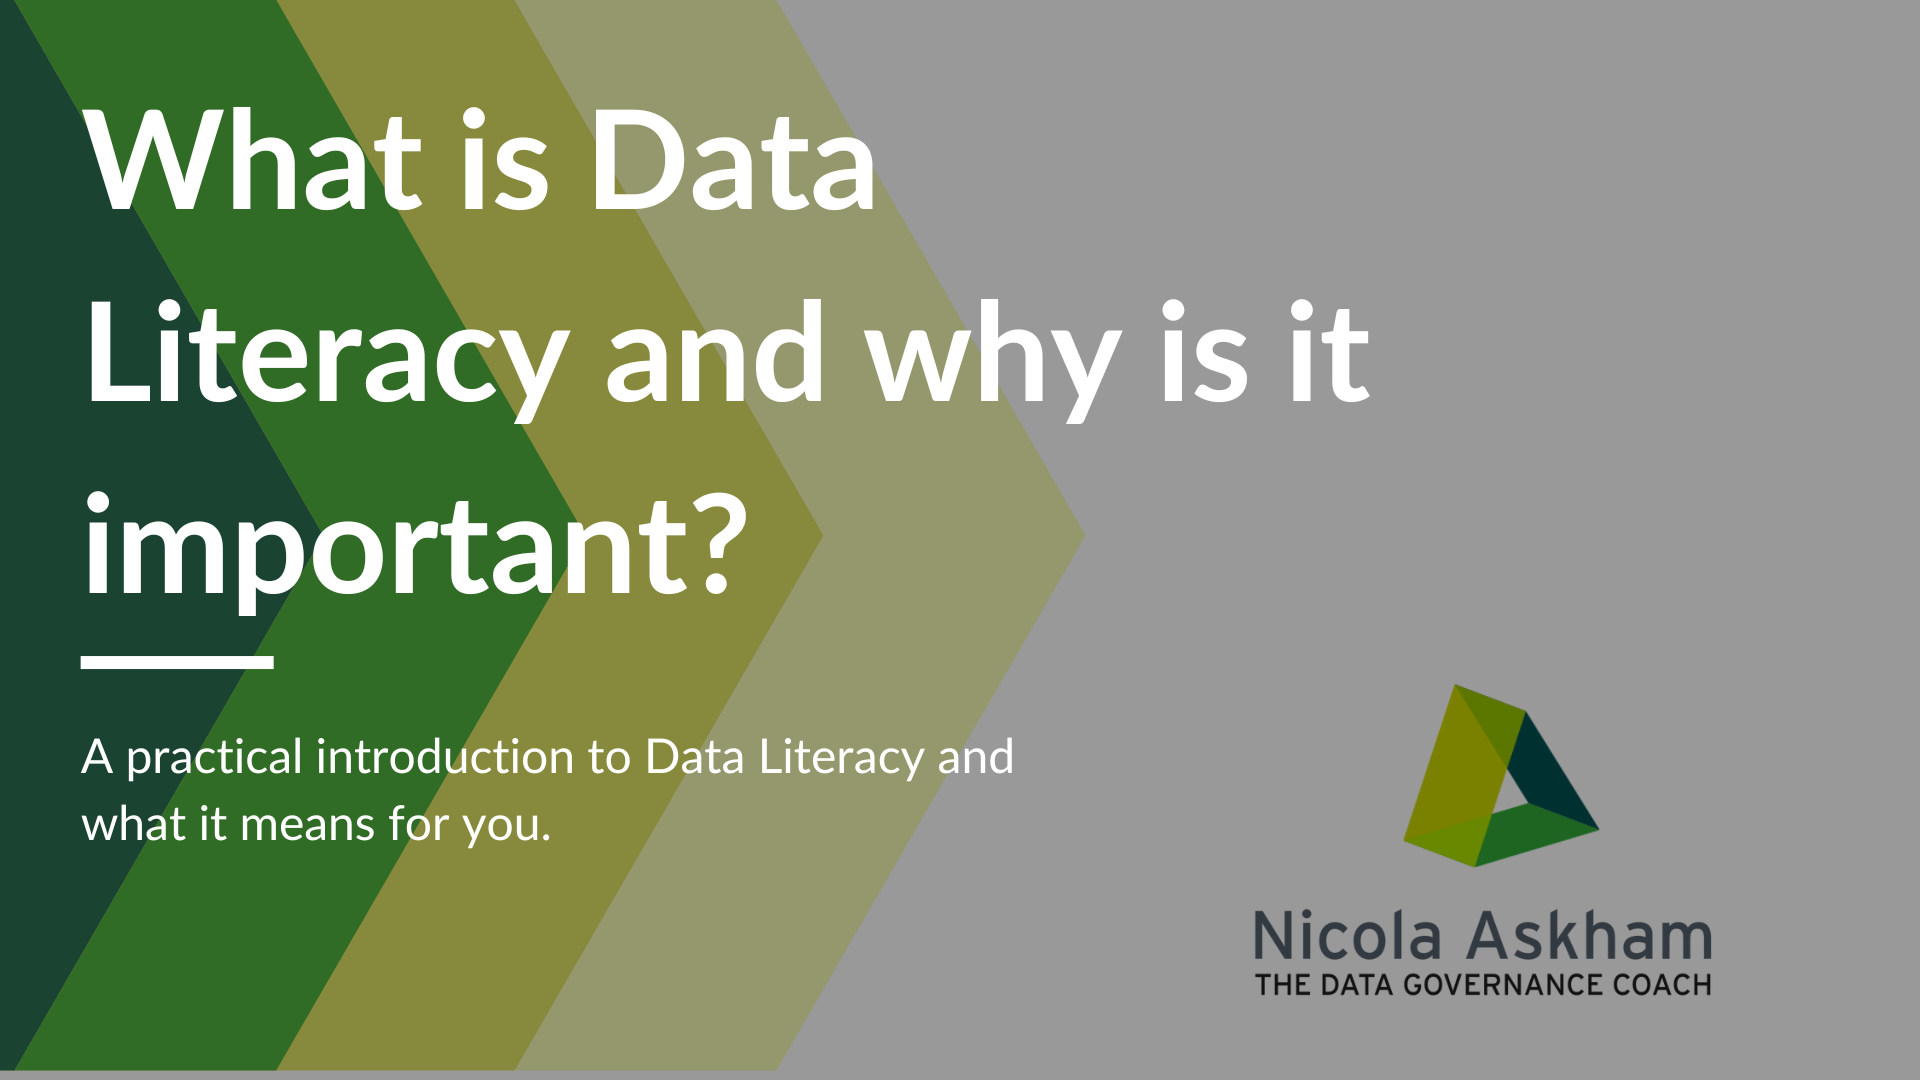 What is Data Literacy and Why is it important?